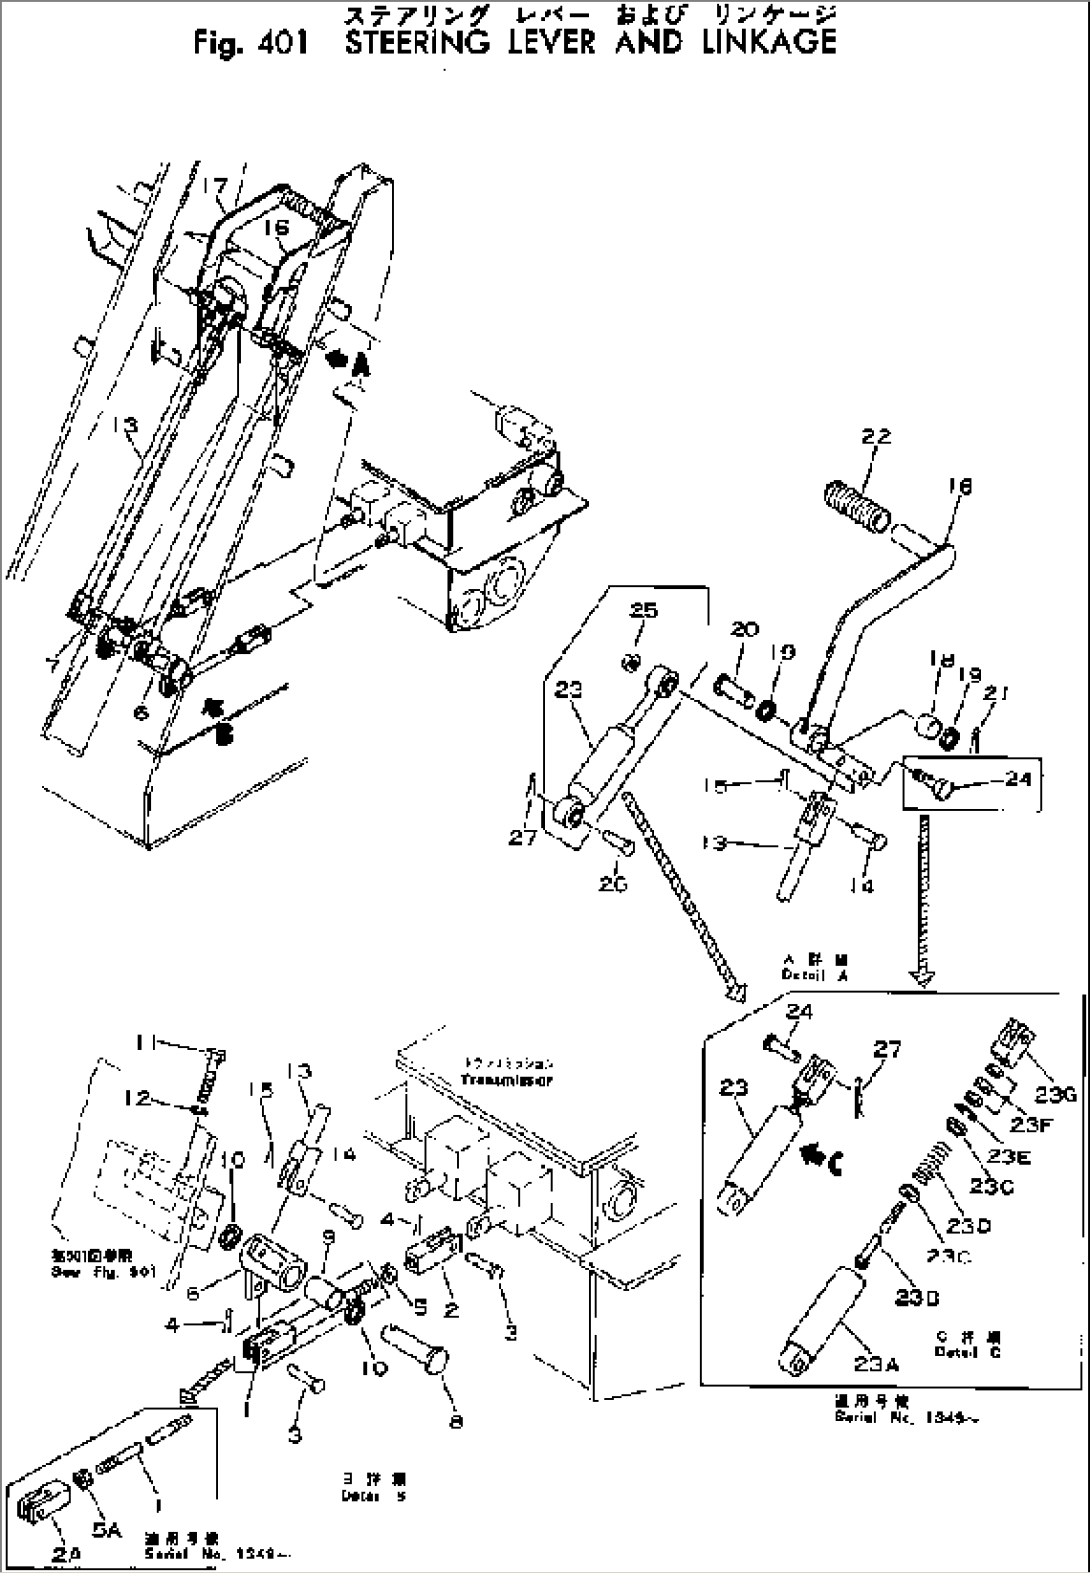 STEERING LEVER AND LINKAGE